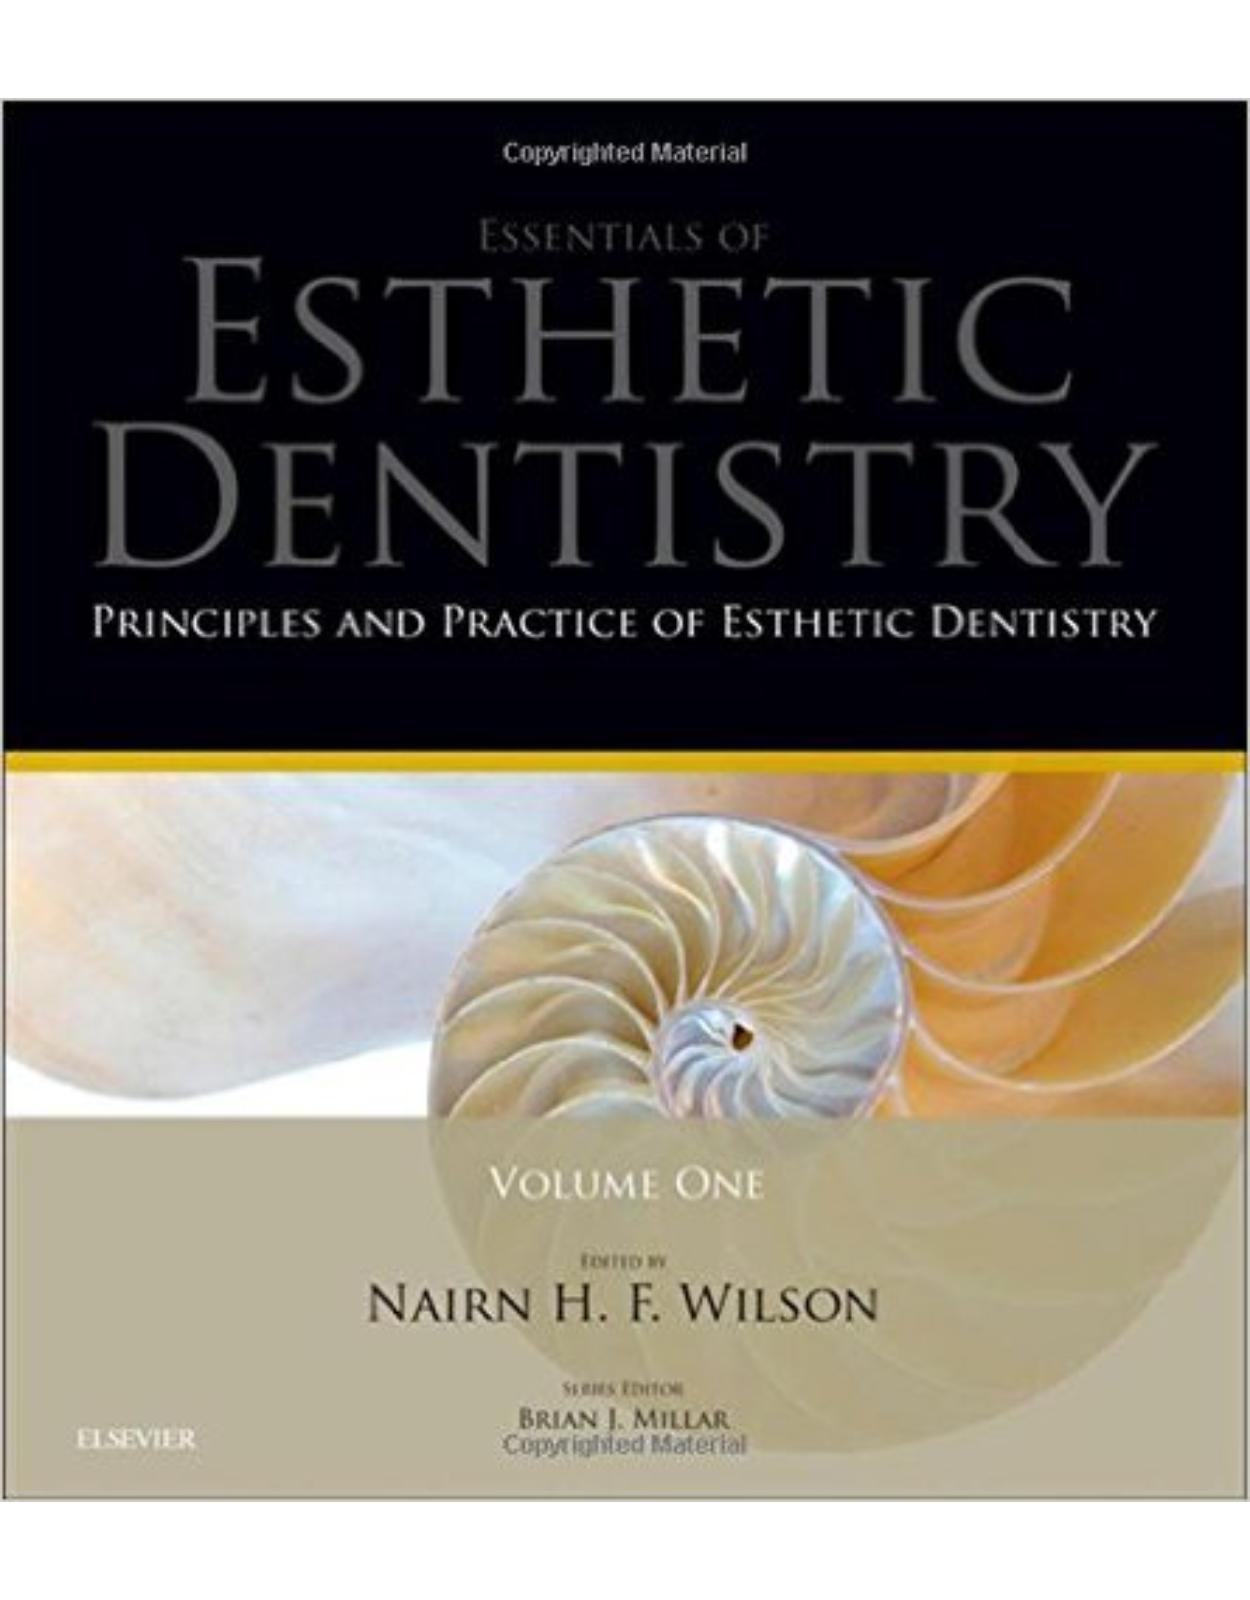 Principles and Practice of Esthetic Dentistry: Essentials of Esthetic Dentistry, 1e